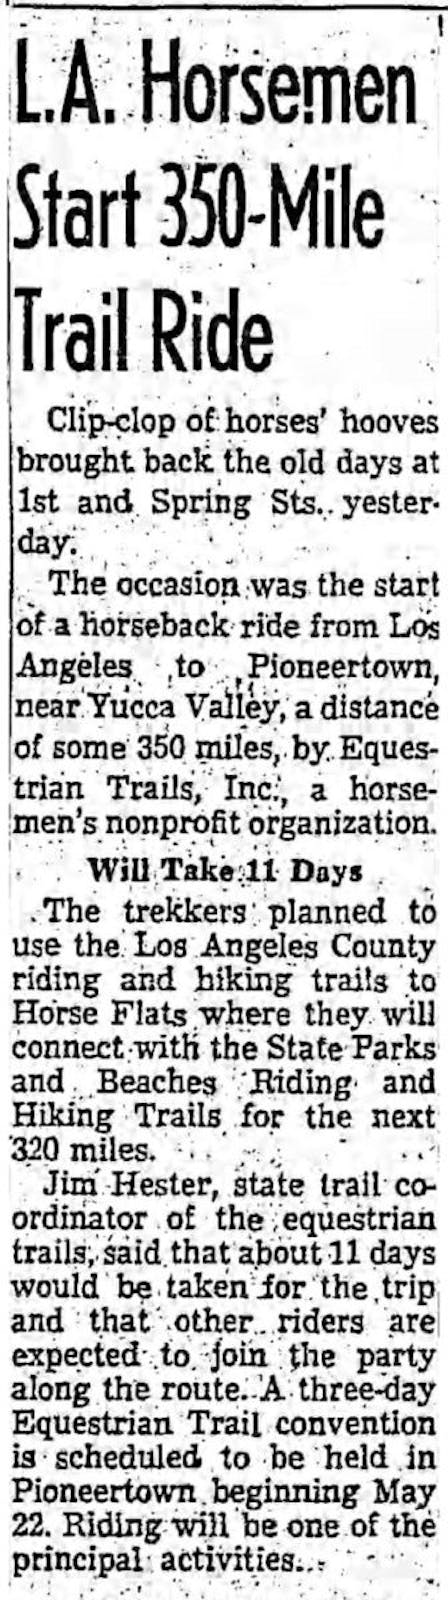 May 11, 1959 - The Los Angeles Times